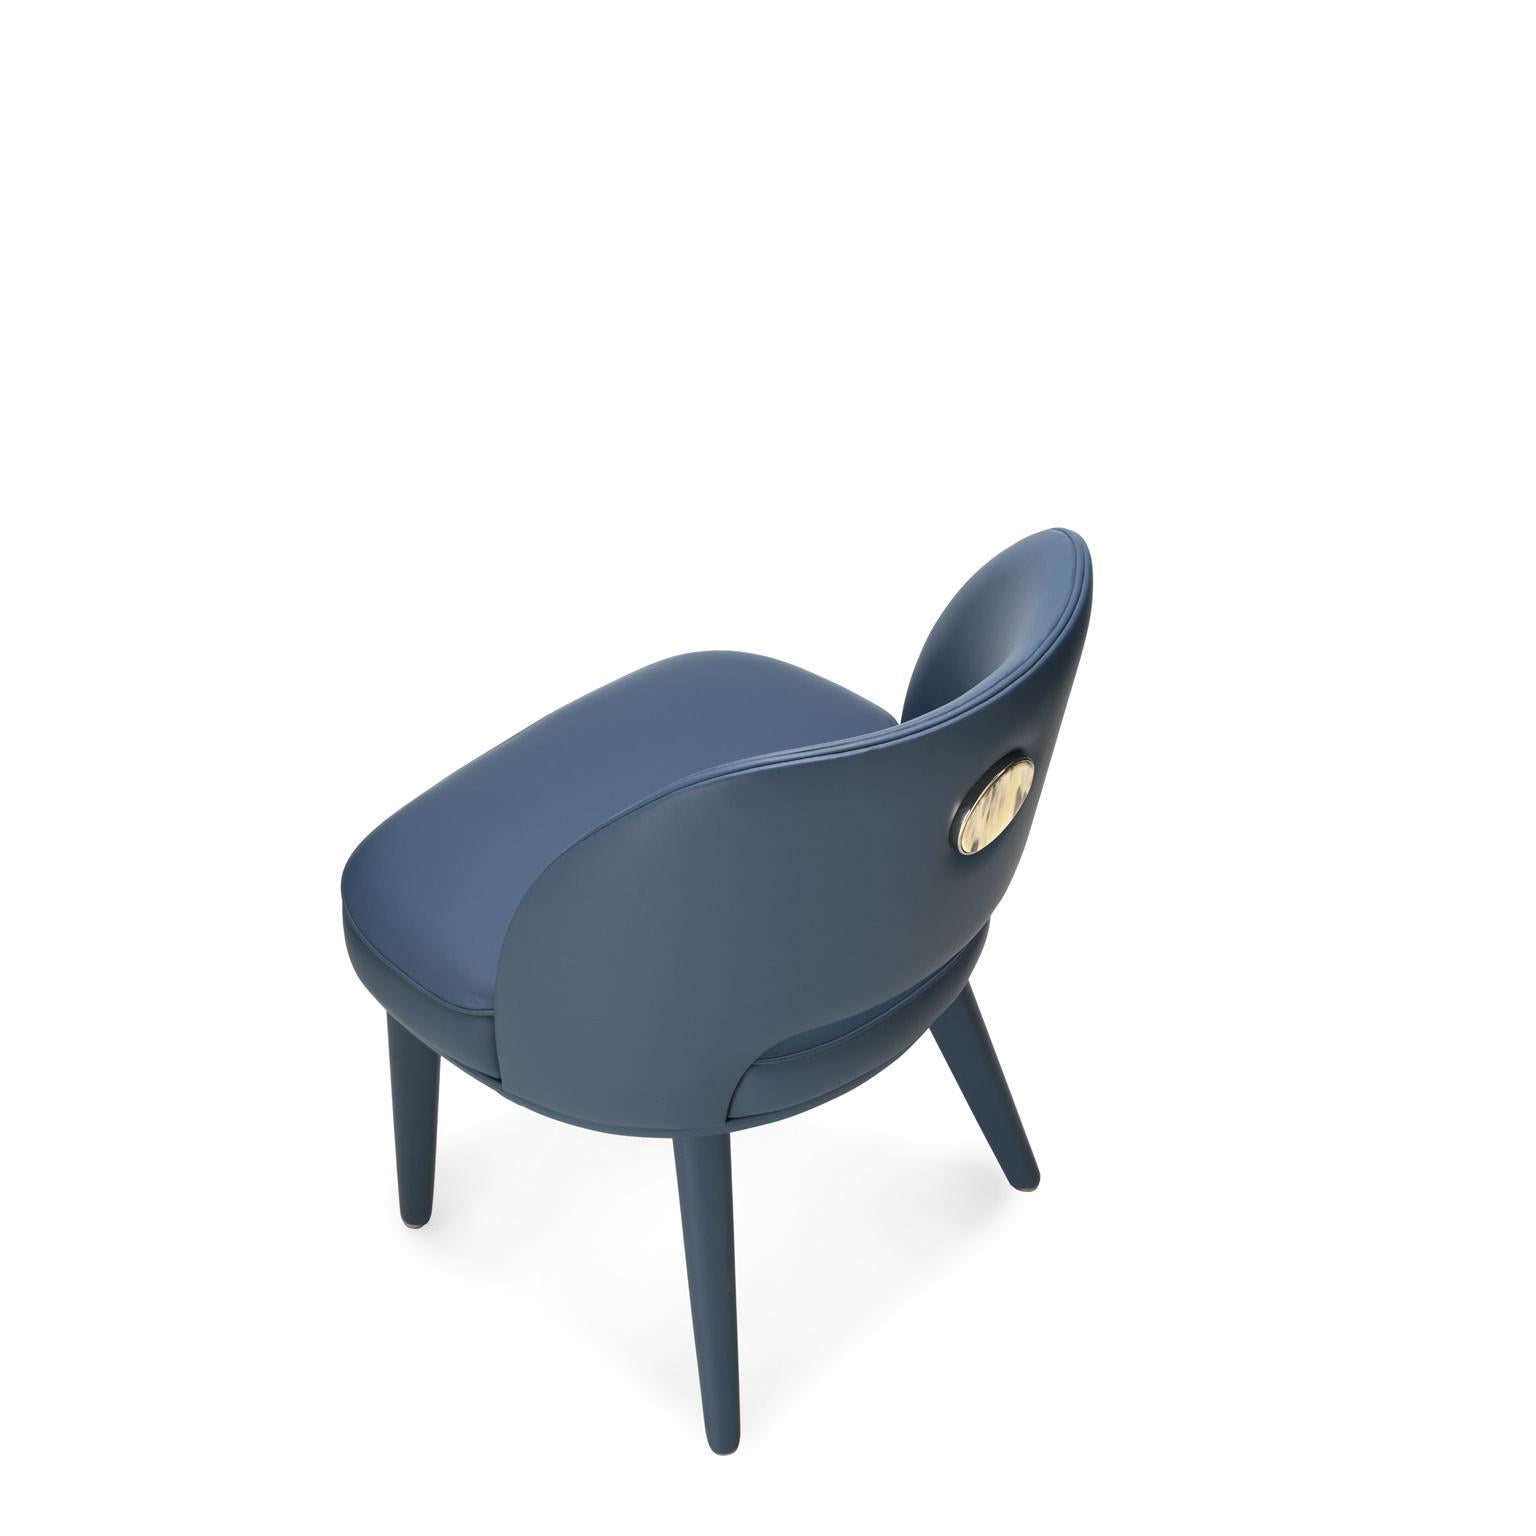 Contemporary Penelope Chair in blue Tosca Leather with Detail in Corno Italiano, Mod. 4430SC For Sale